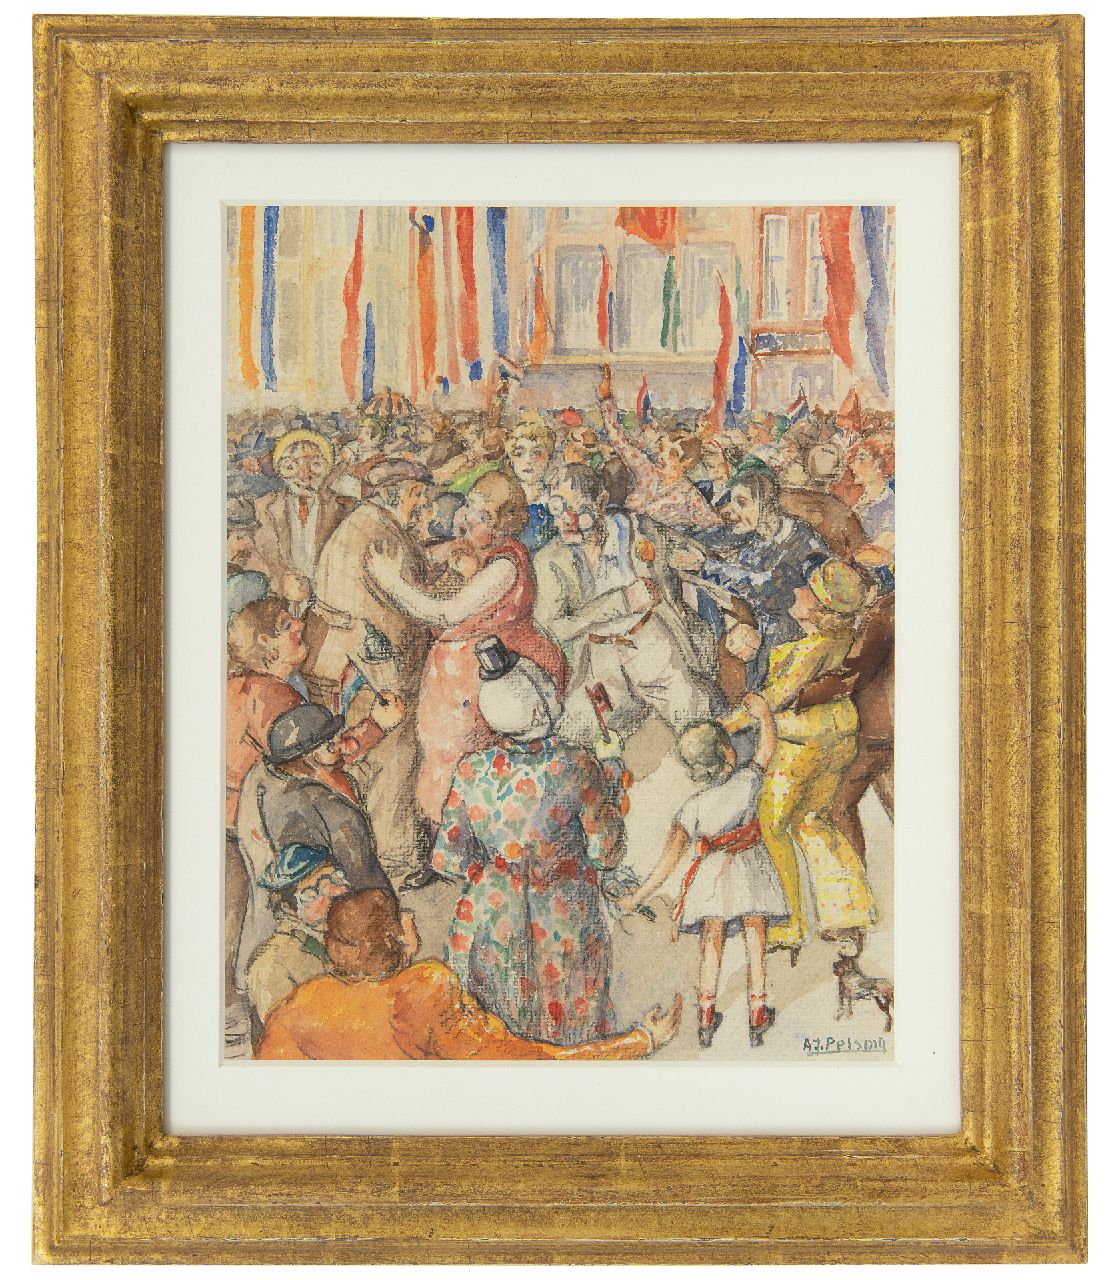 Pelsma A.J.  | Anne Jan Pelsma | Watercolours and drawings offered for sale | Street party, crayon and watercolour on paper 29.5 x 23.5 cm, signed l.r.